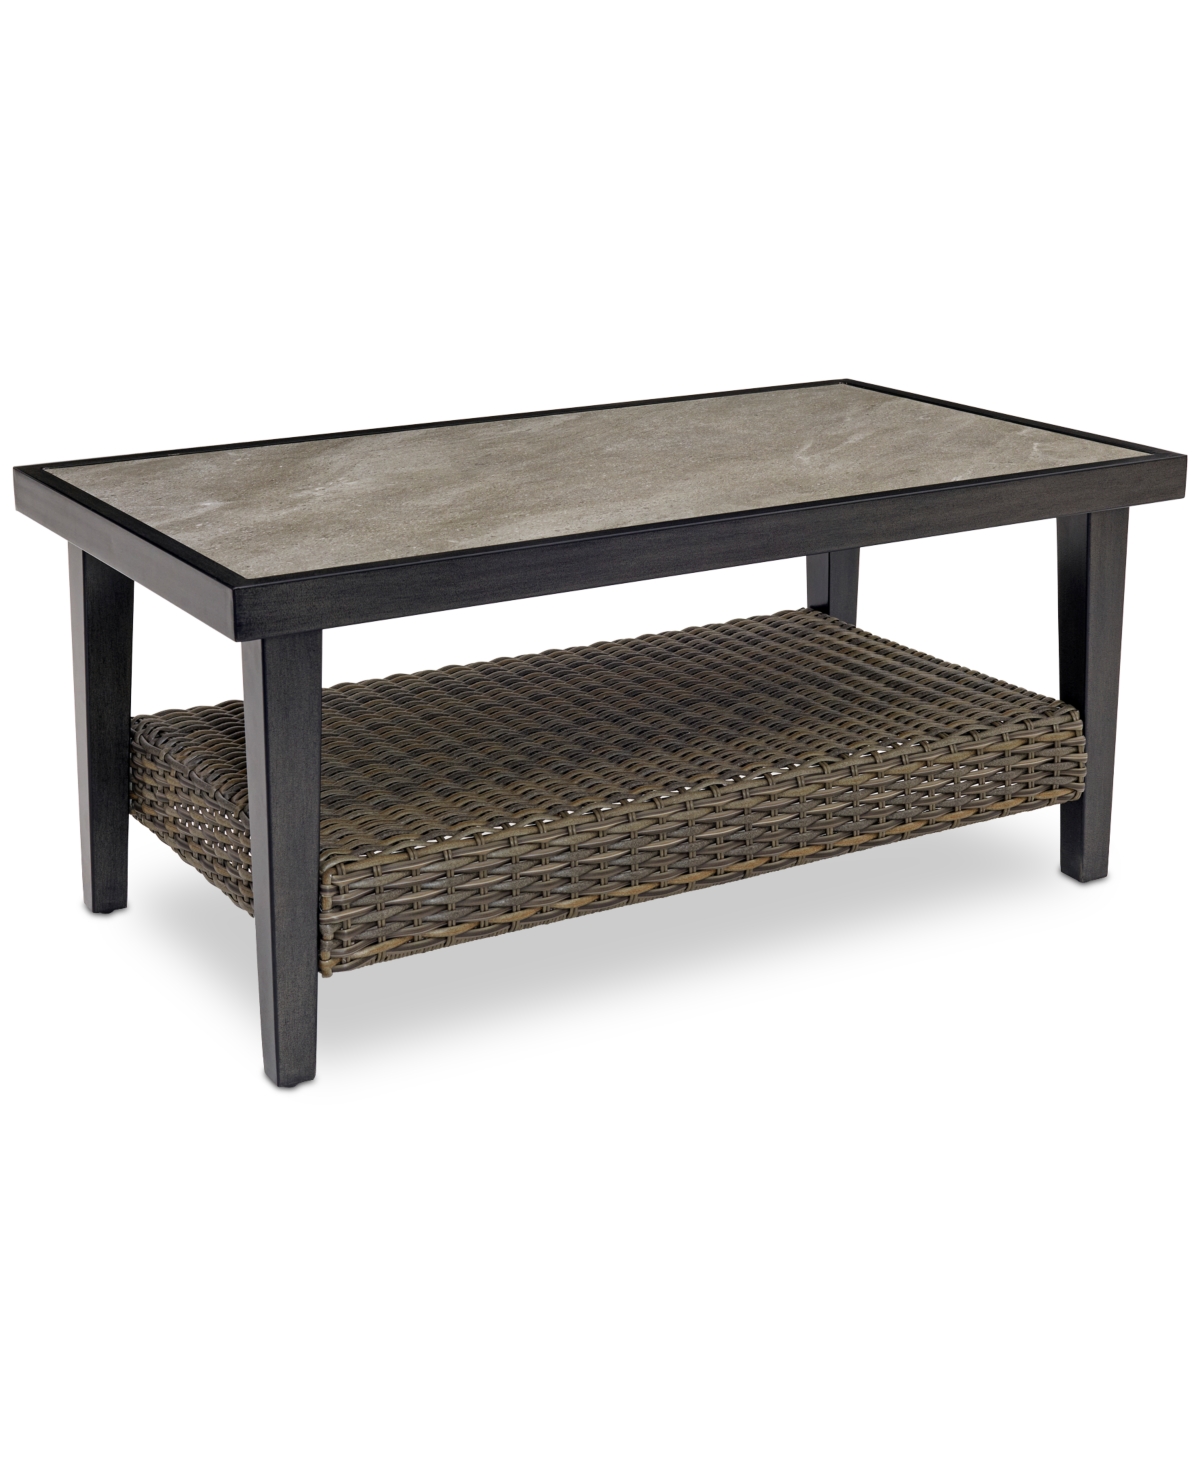 Agio Belmont Outdoor 44"x25" Rectangle Tile Top Coffee Table In Gray